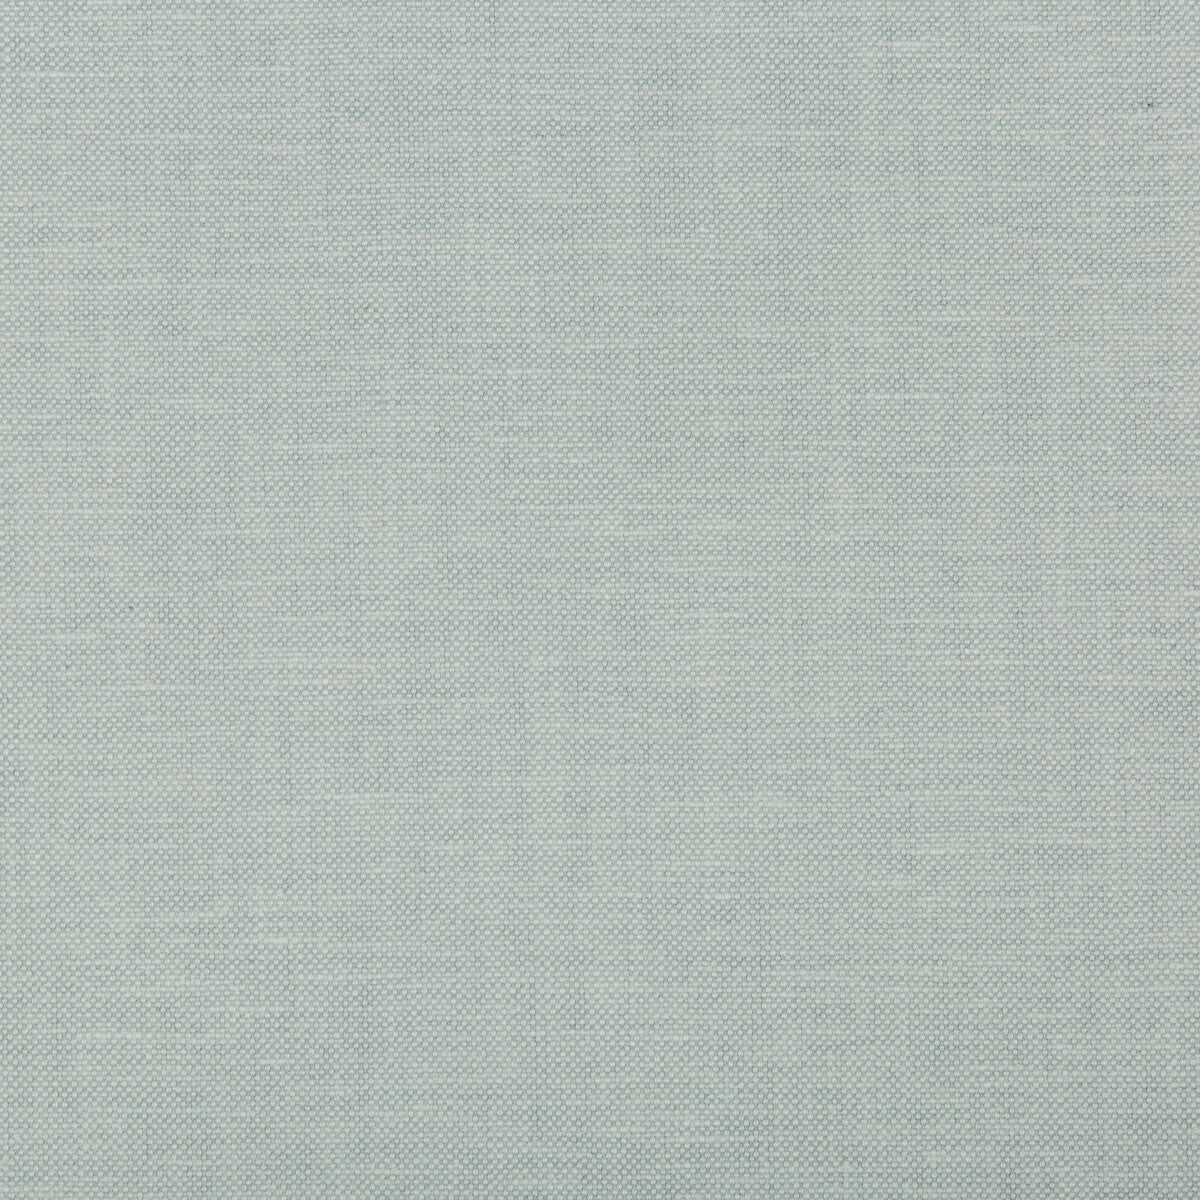 Oxfordian fabric in aqua color - pattern 35543.115.0 - by Kravet Basics in the Bermuda collection